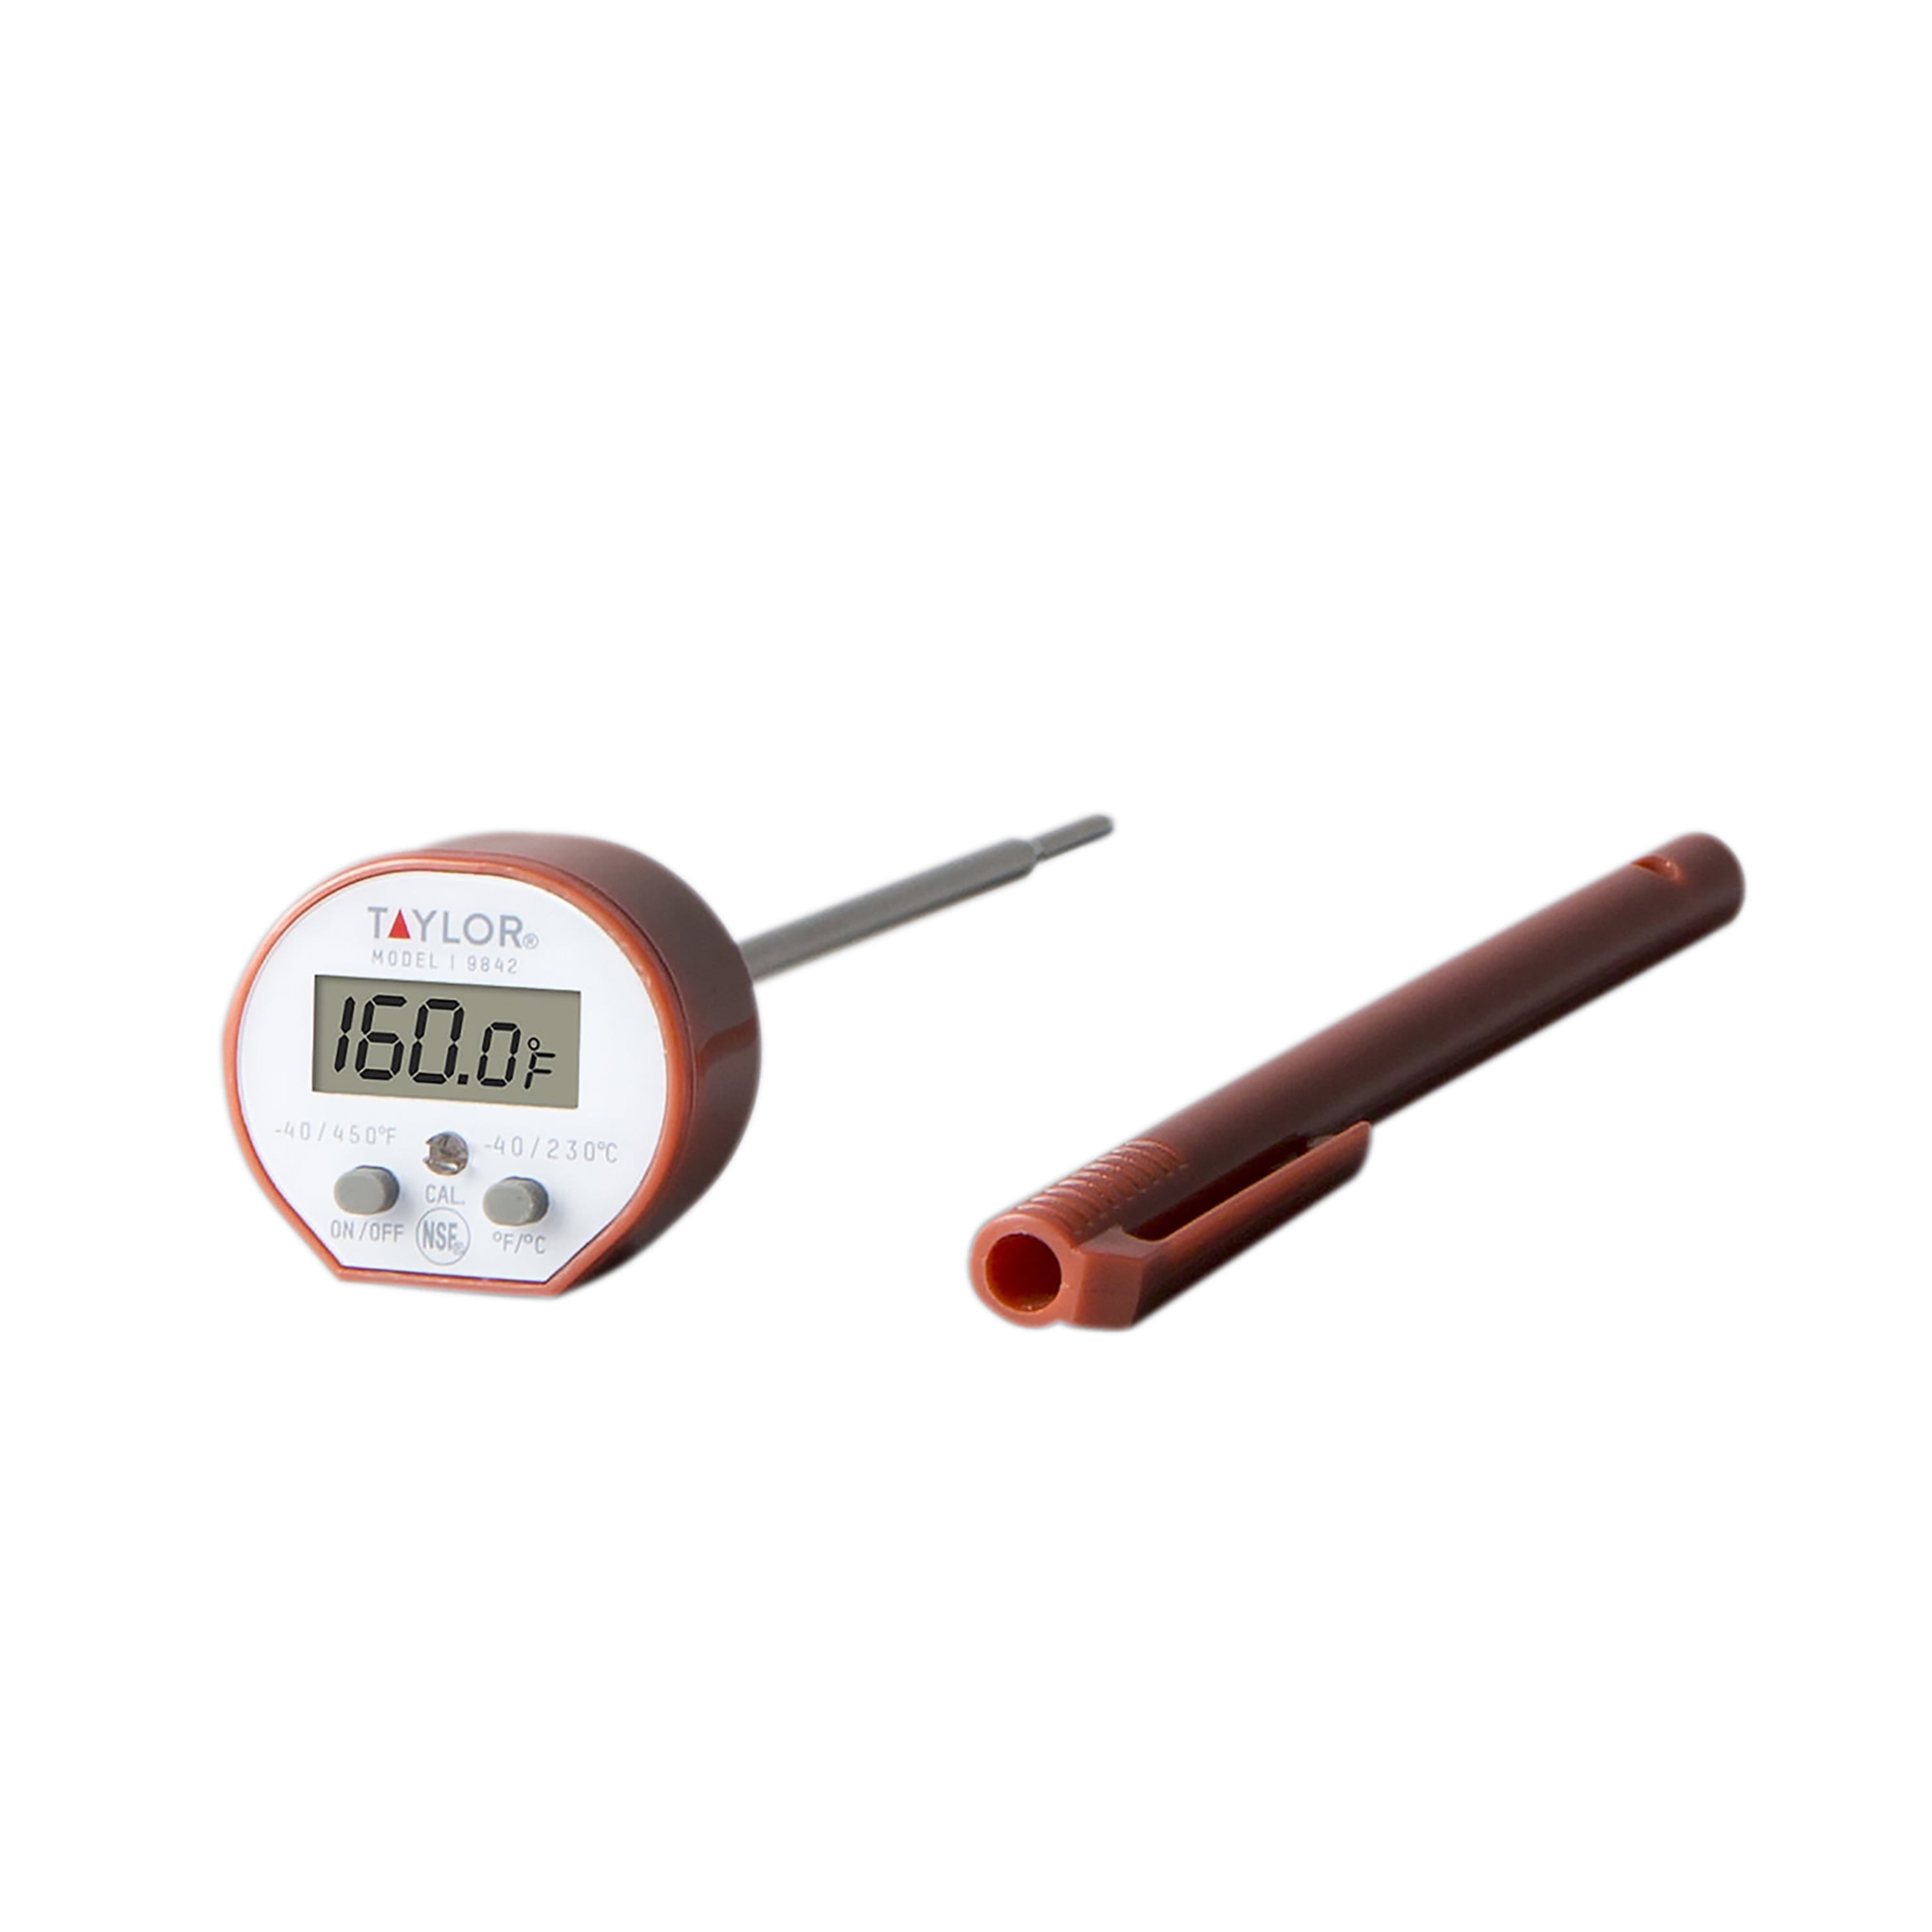 Taylor Instant Read Analog Meat Thermometer - Oven Safe Model 552